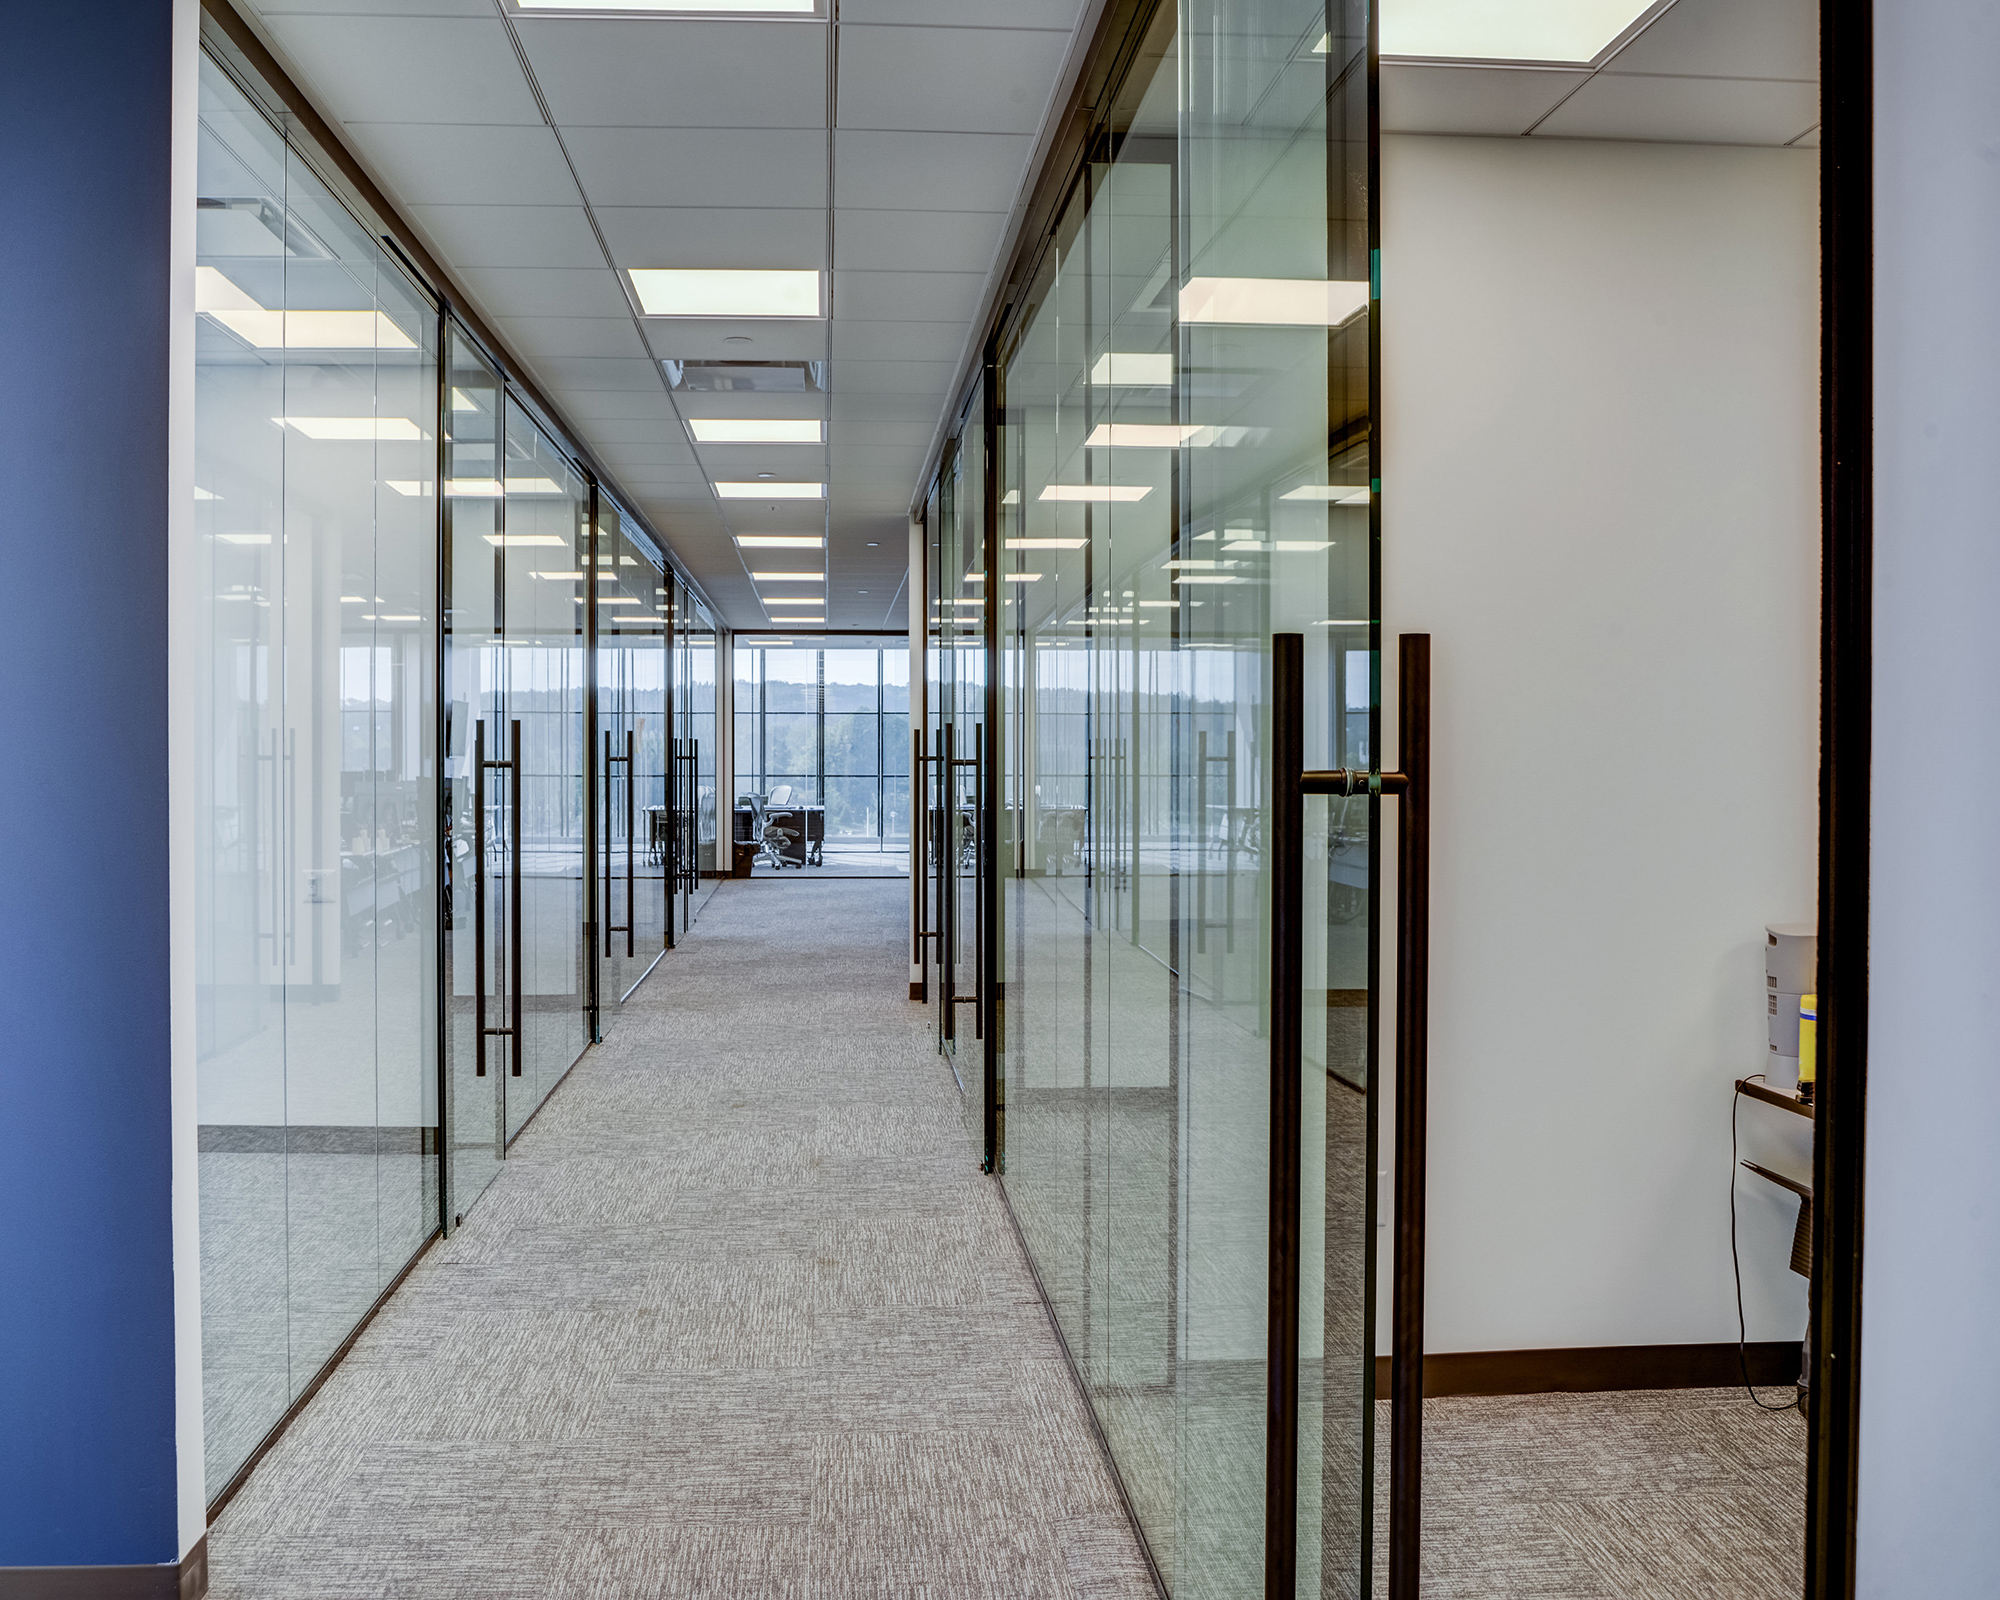 Office Hallways with bright glass cubicles